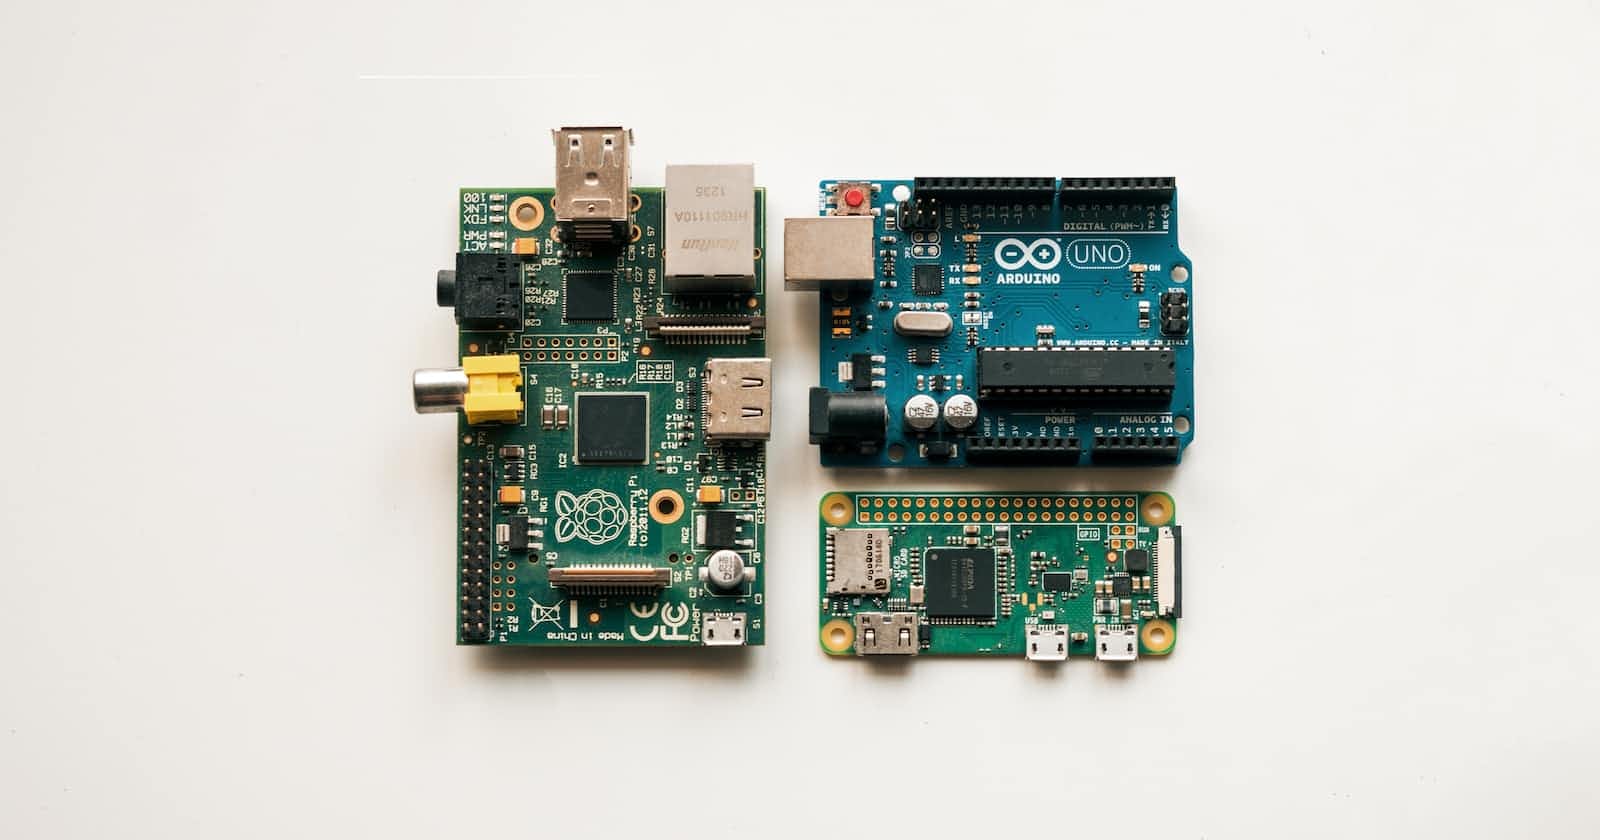 Creating your personal media server with Raspberry Pi and Plex